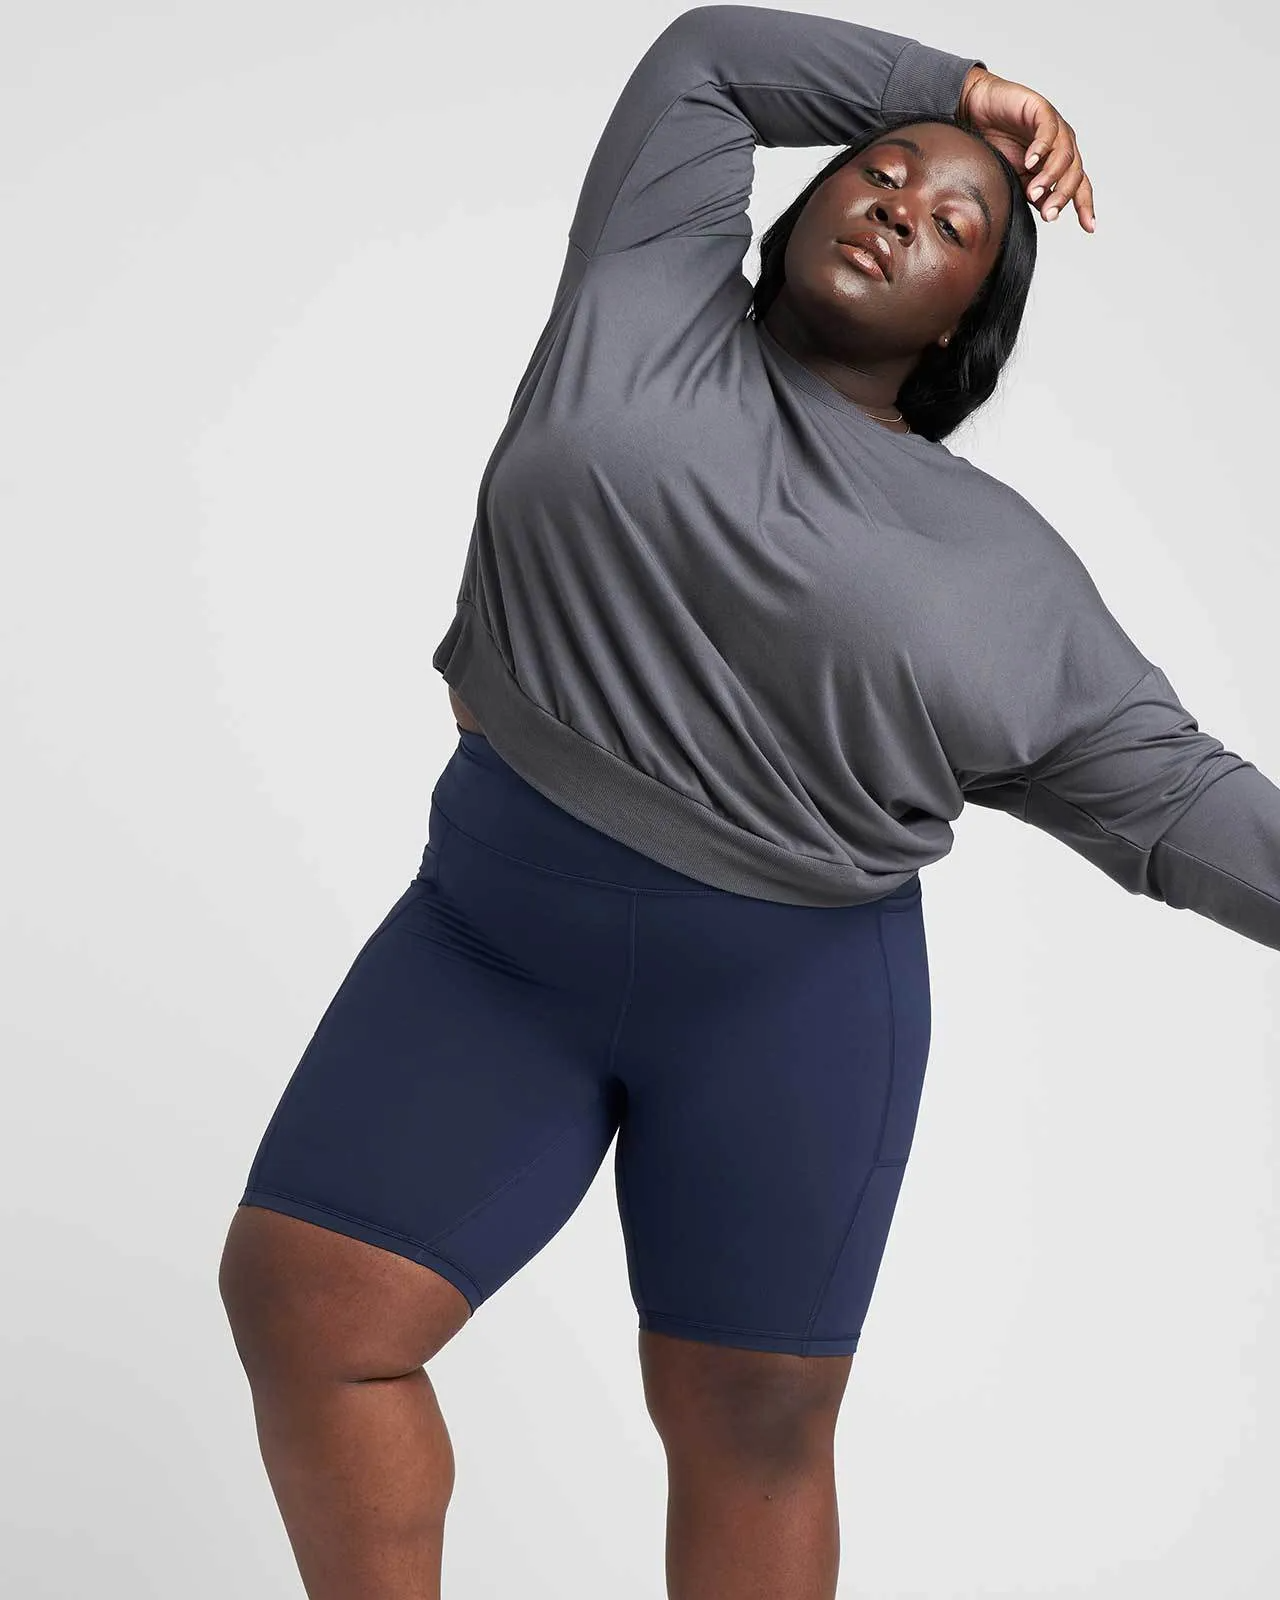 8 Plus Size Activewear Brands To Have On Your Radar